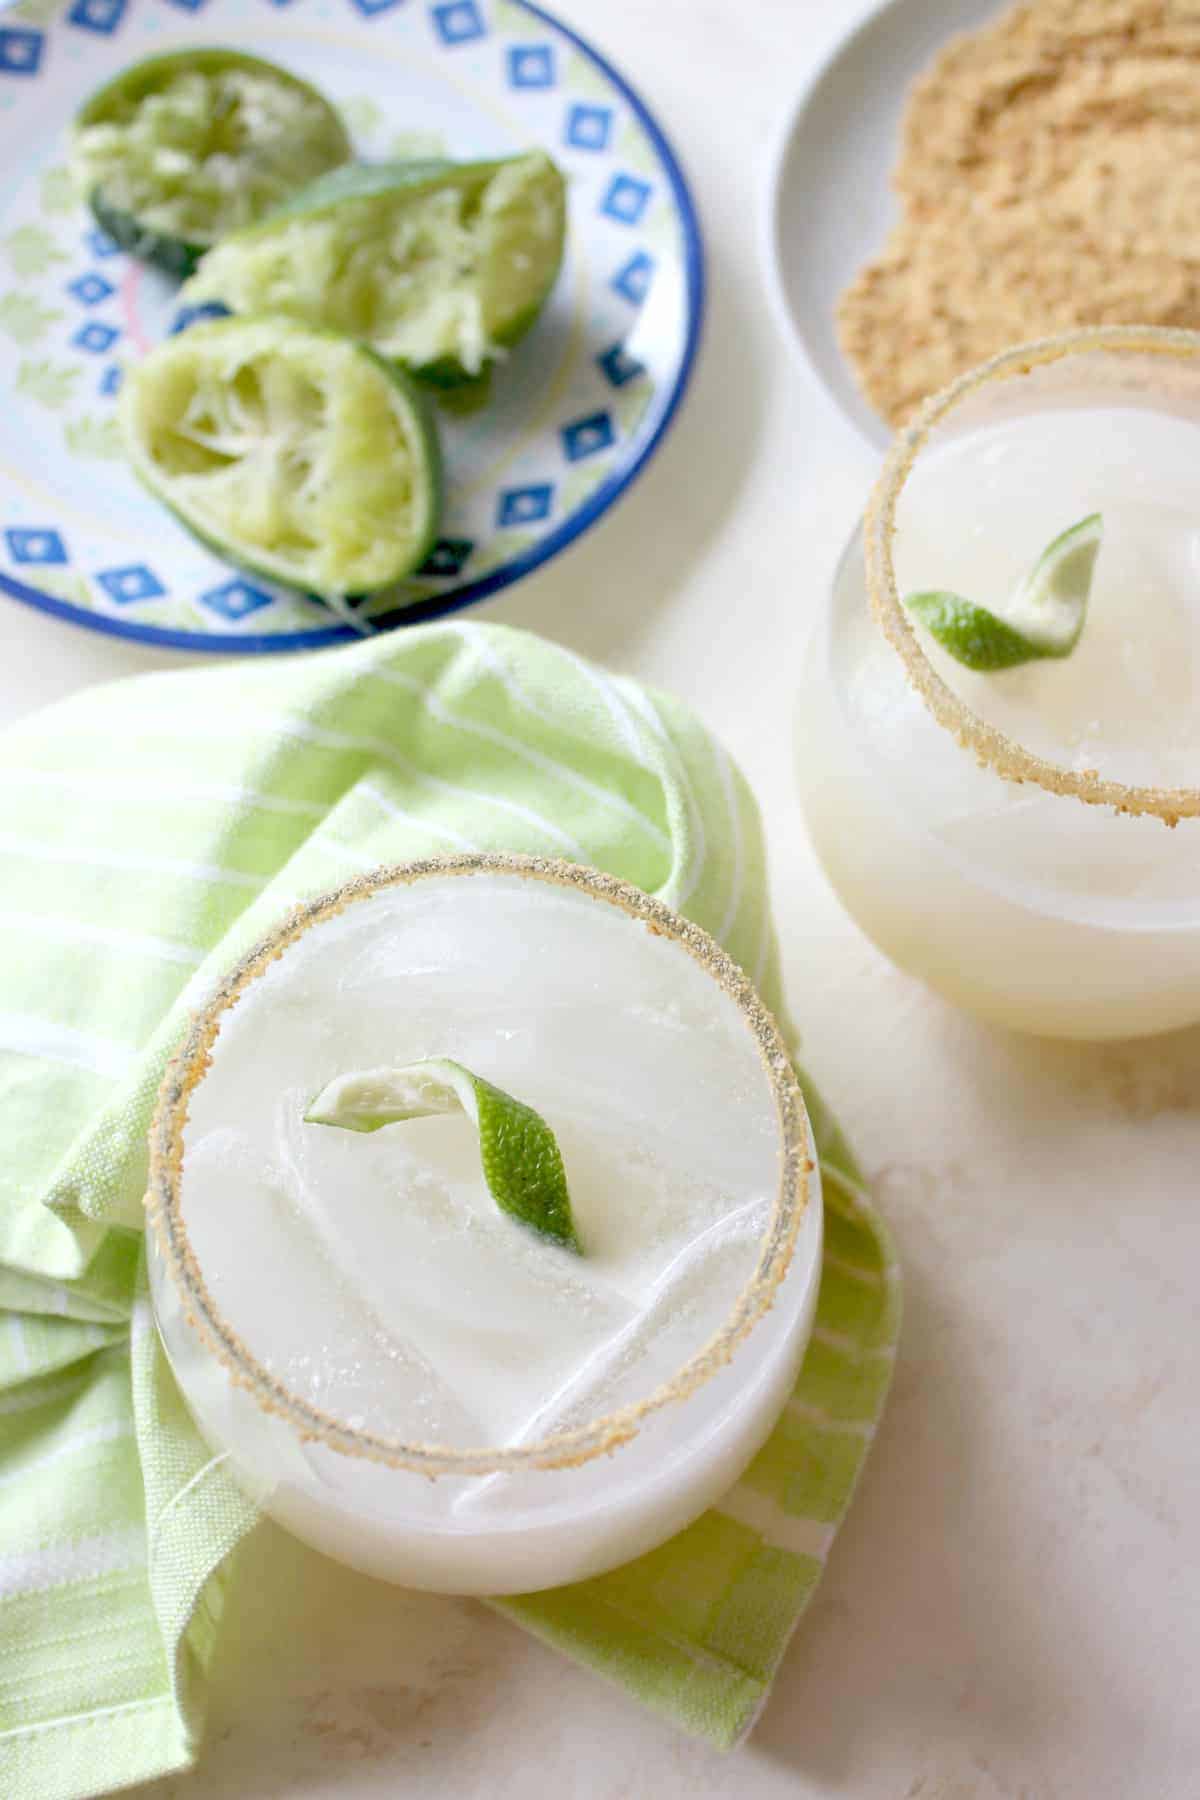 Coconut Key Lime Pie Coolers! The combination of tart lime juice and creamy coconut milk will make you reach for another sip of this tasty drink and remind you of sweet and smooth key lime pie with an extra tropical twist. Rim the glass with crushed graham crackers to drive the flavor home! 